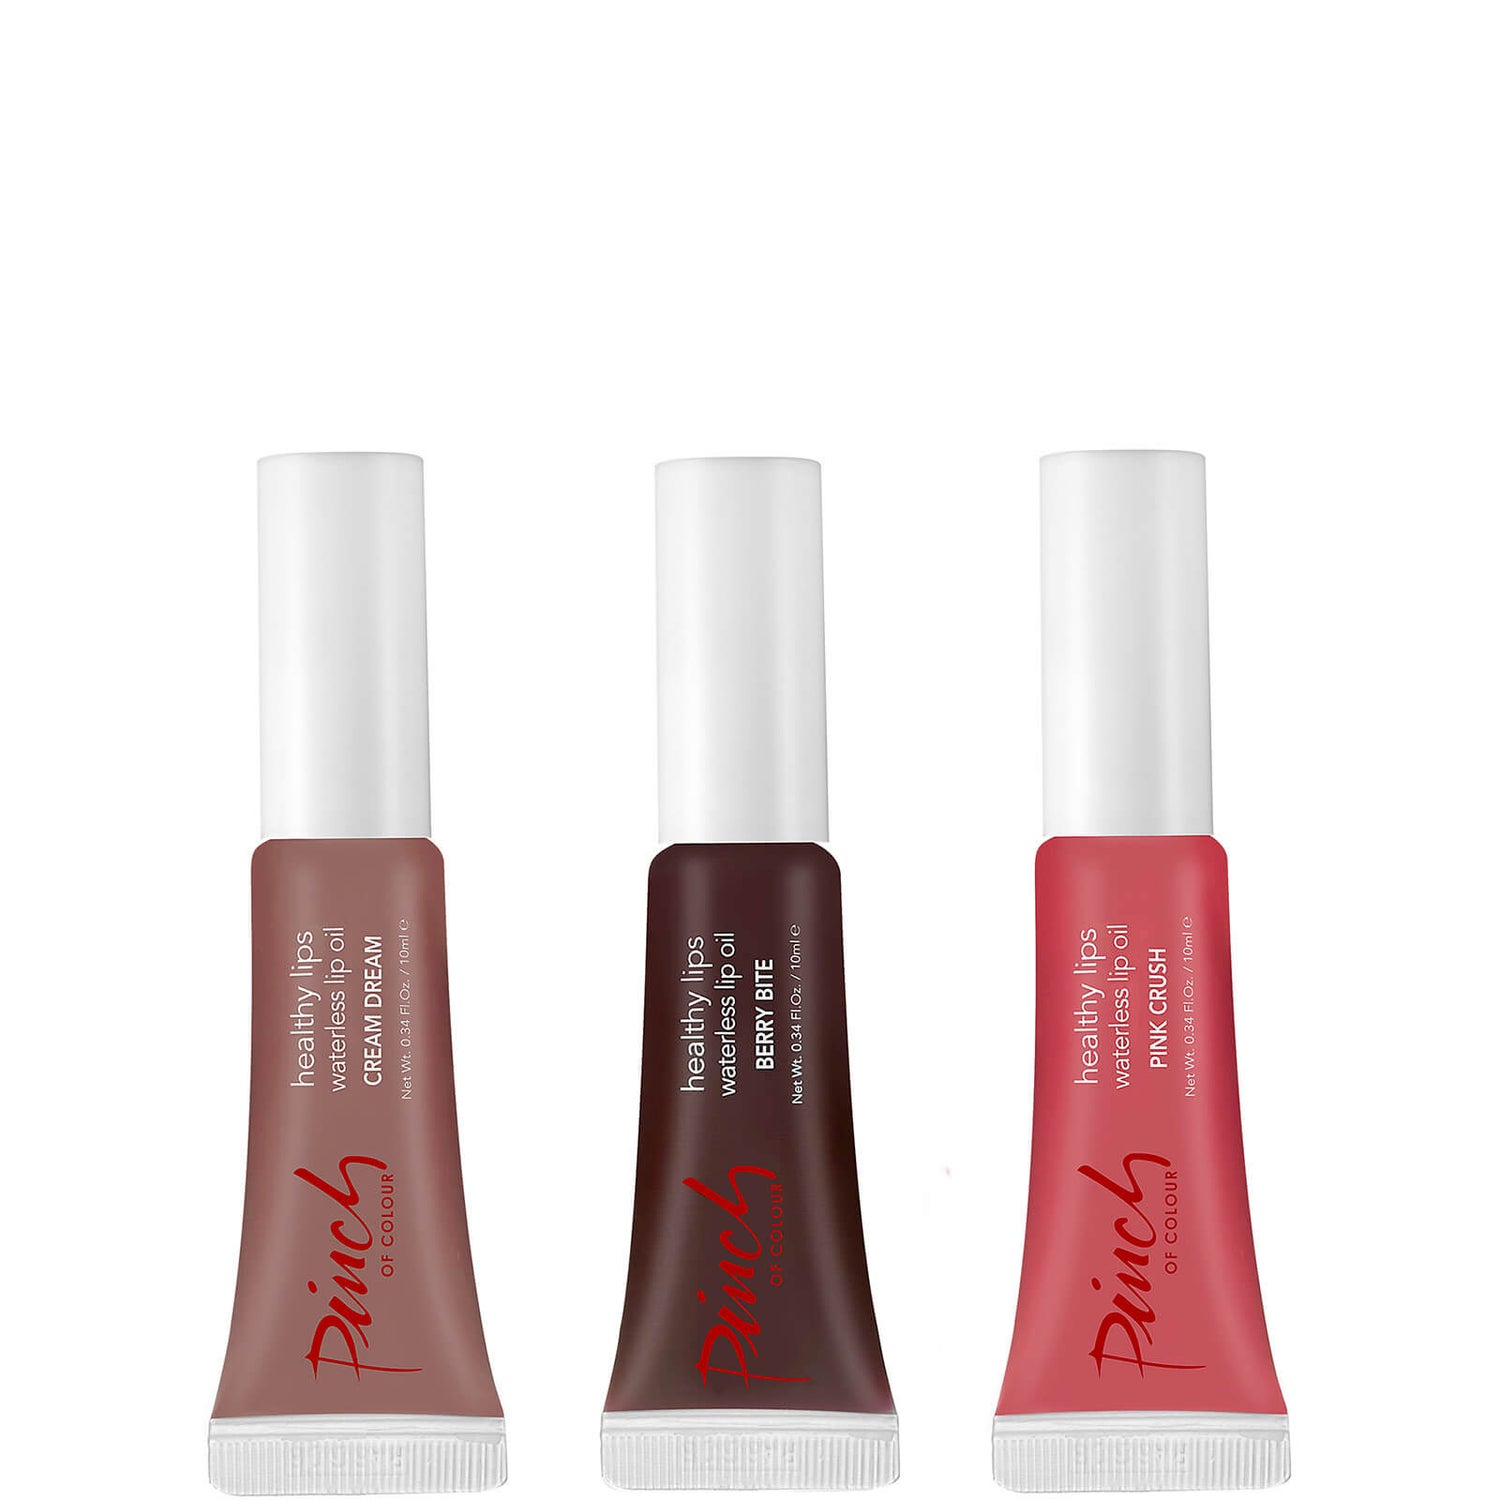 Pinch of Colour Kiss and Glow Set (Worth £54.00)